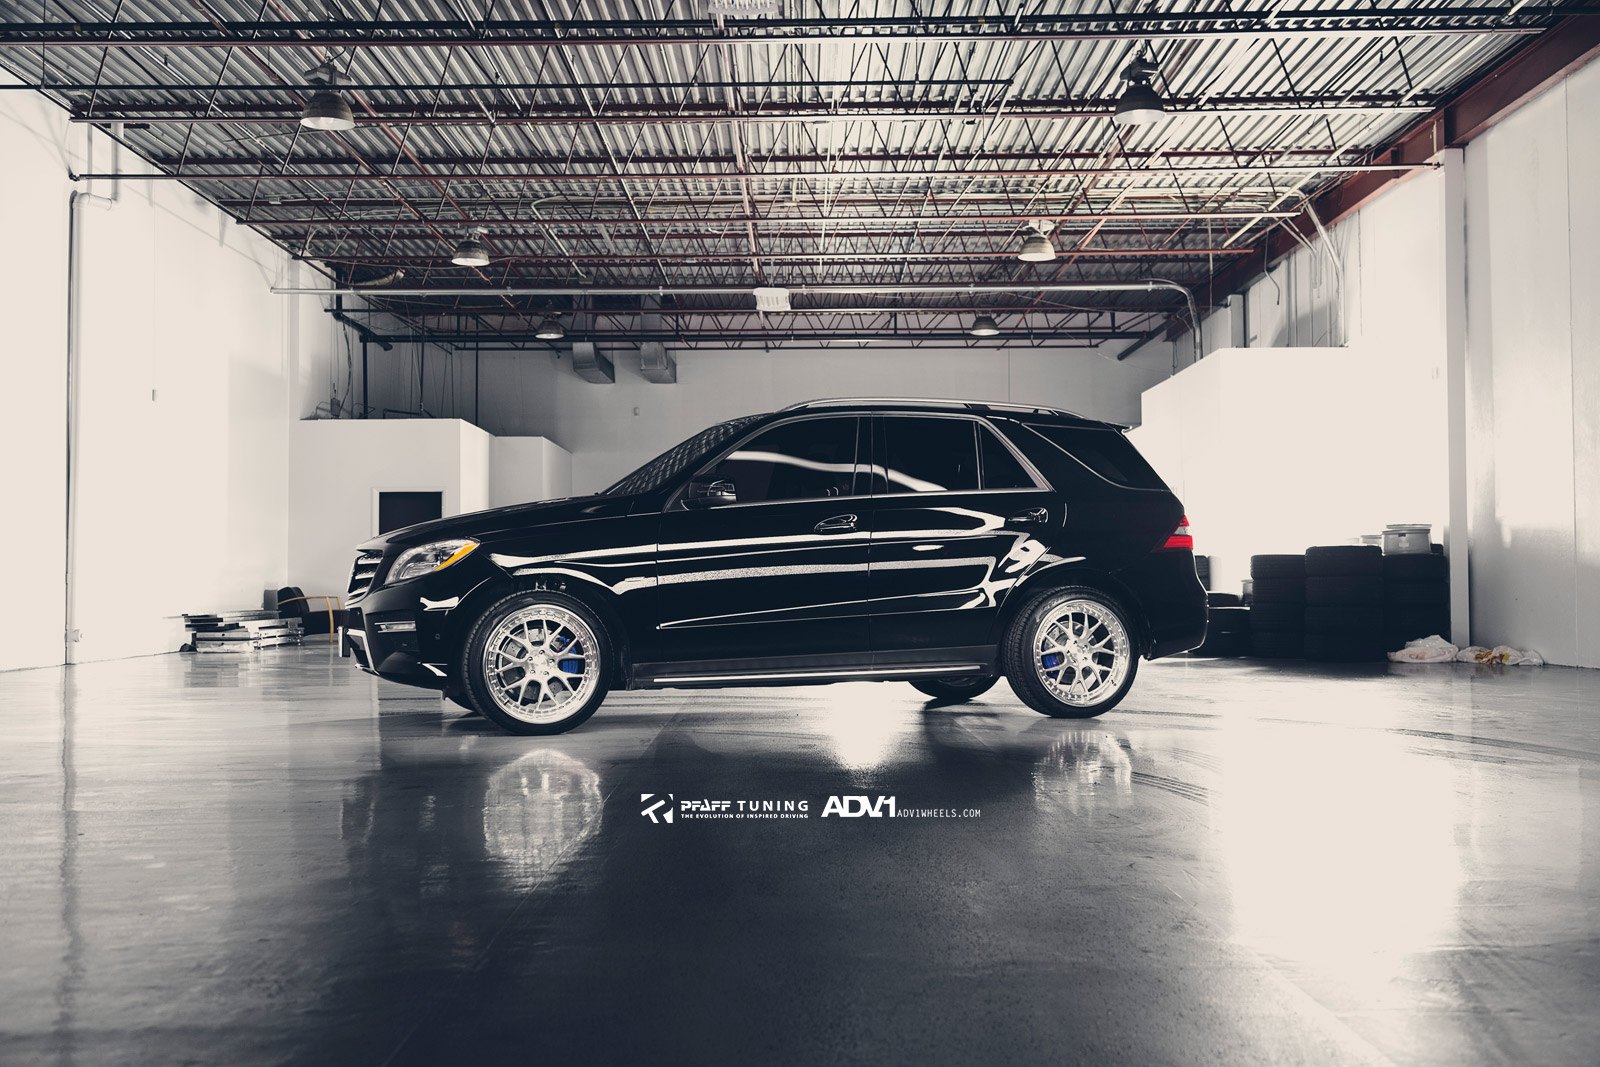 Modular Forged Rims on Mercedes M-Class - Photo by ADV.1